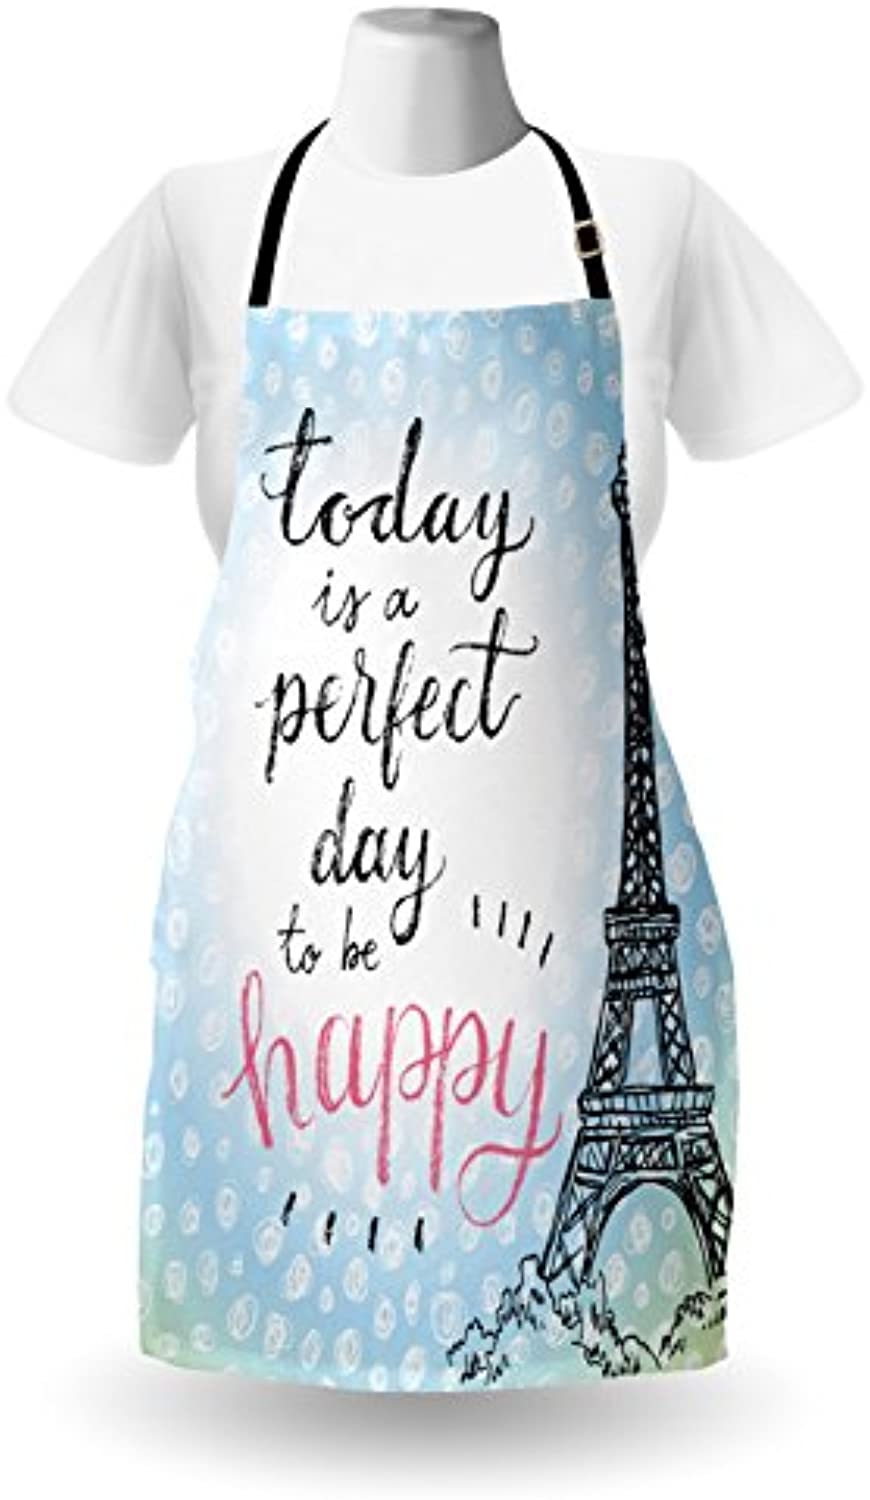 Granbey Eiffel Tower Apron  Perfect Day Eiffel Tower Polka Dot Handwriting Typography Sketch Paris Print  Unisex Kitchen Bib with Adjustable Neck for Cooking Gardening  Adult Size  Black Blue